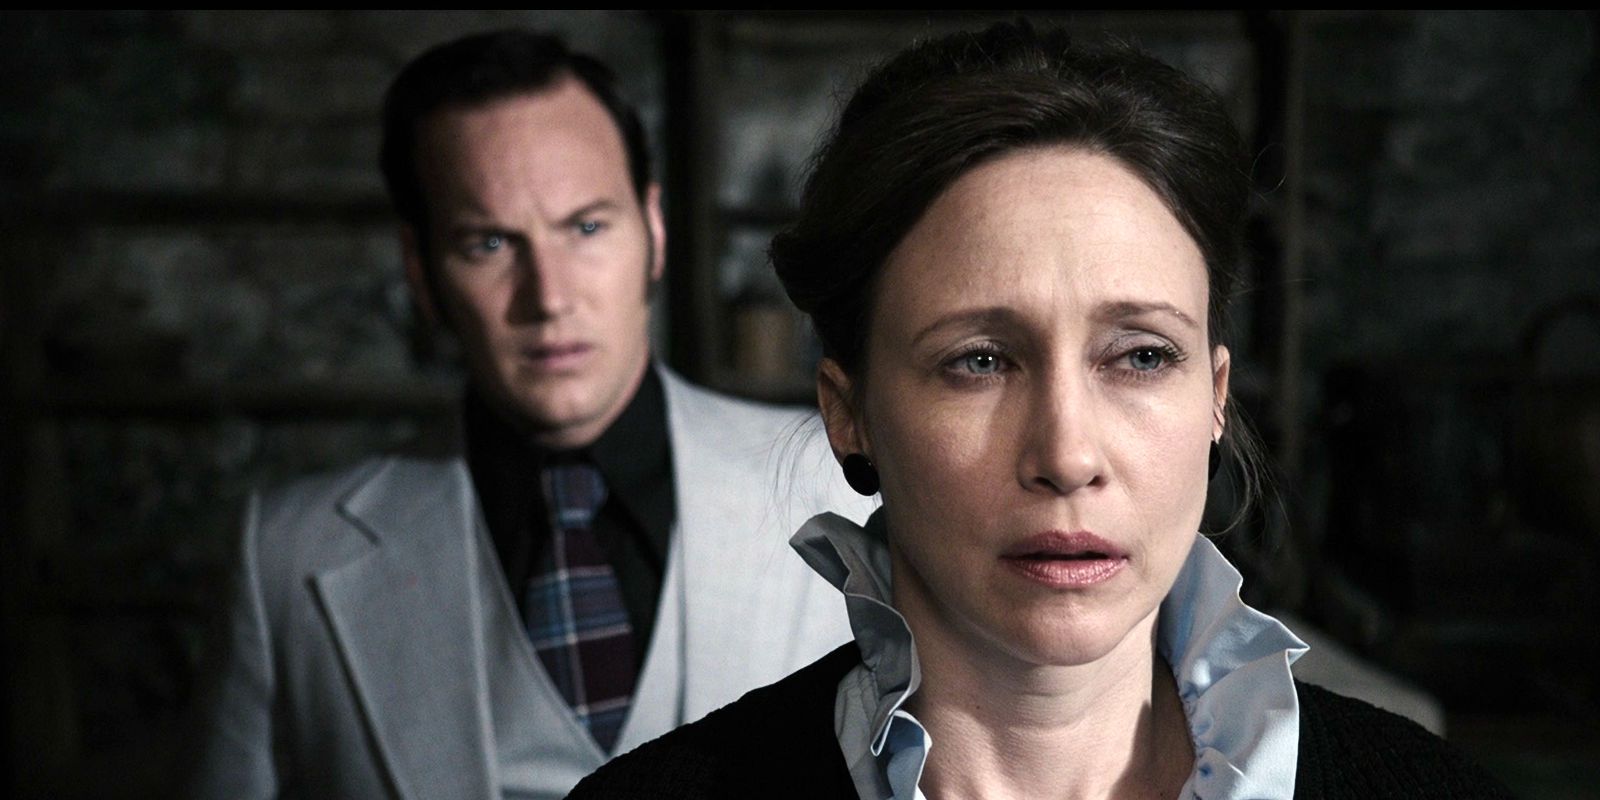 The Conjuring 3 Forgets What Made The Original Movie So Special